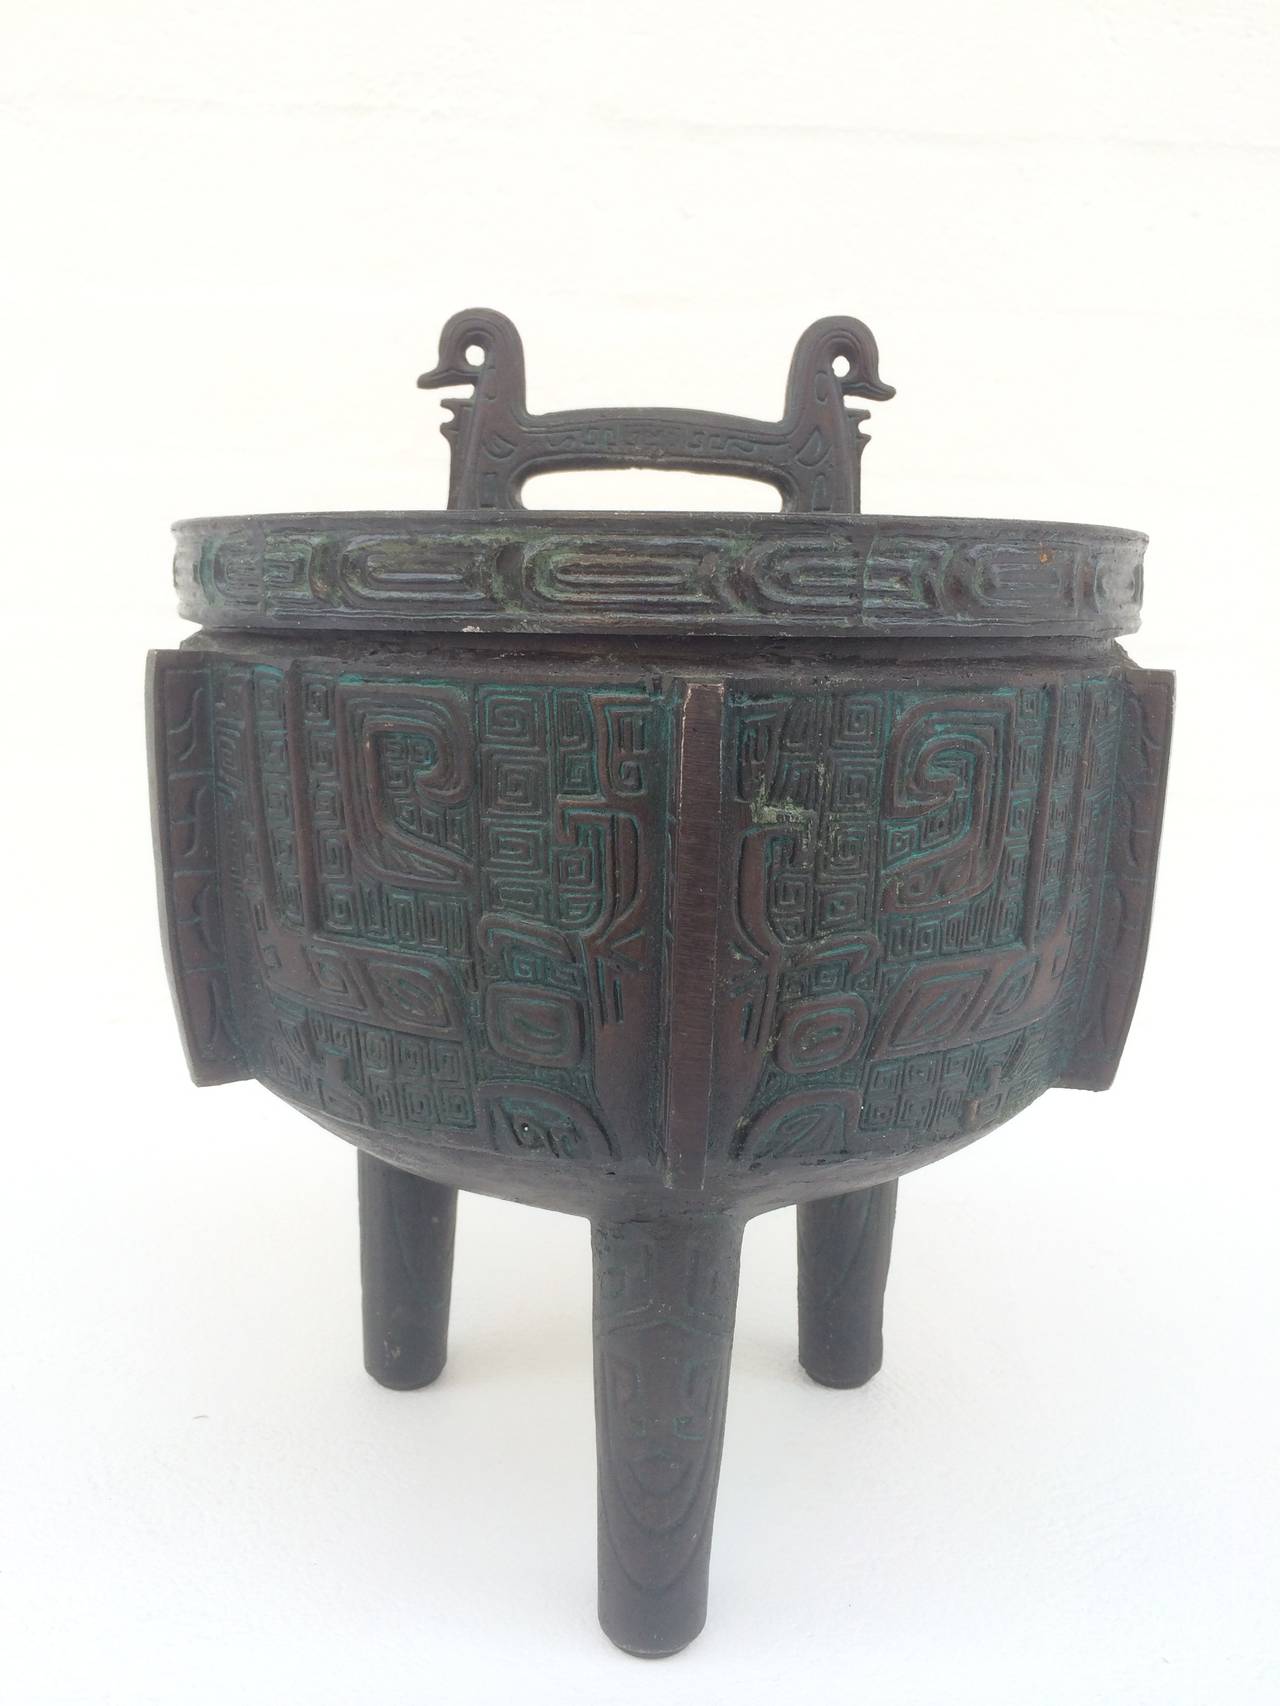 This Mayan inspired ice bucket is attributed to James Mont, circa 1960.
This is the large one, as they also made a much smaller one. 
The outer part is cast metal with stainless steel inside and light blue plastic under the lid and at the rim to